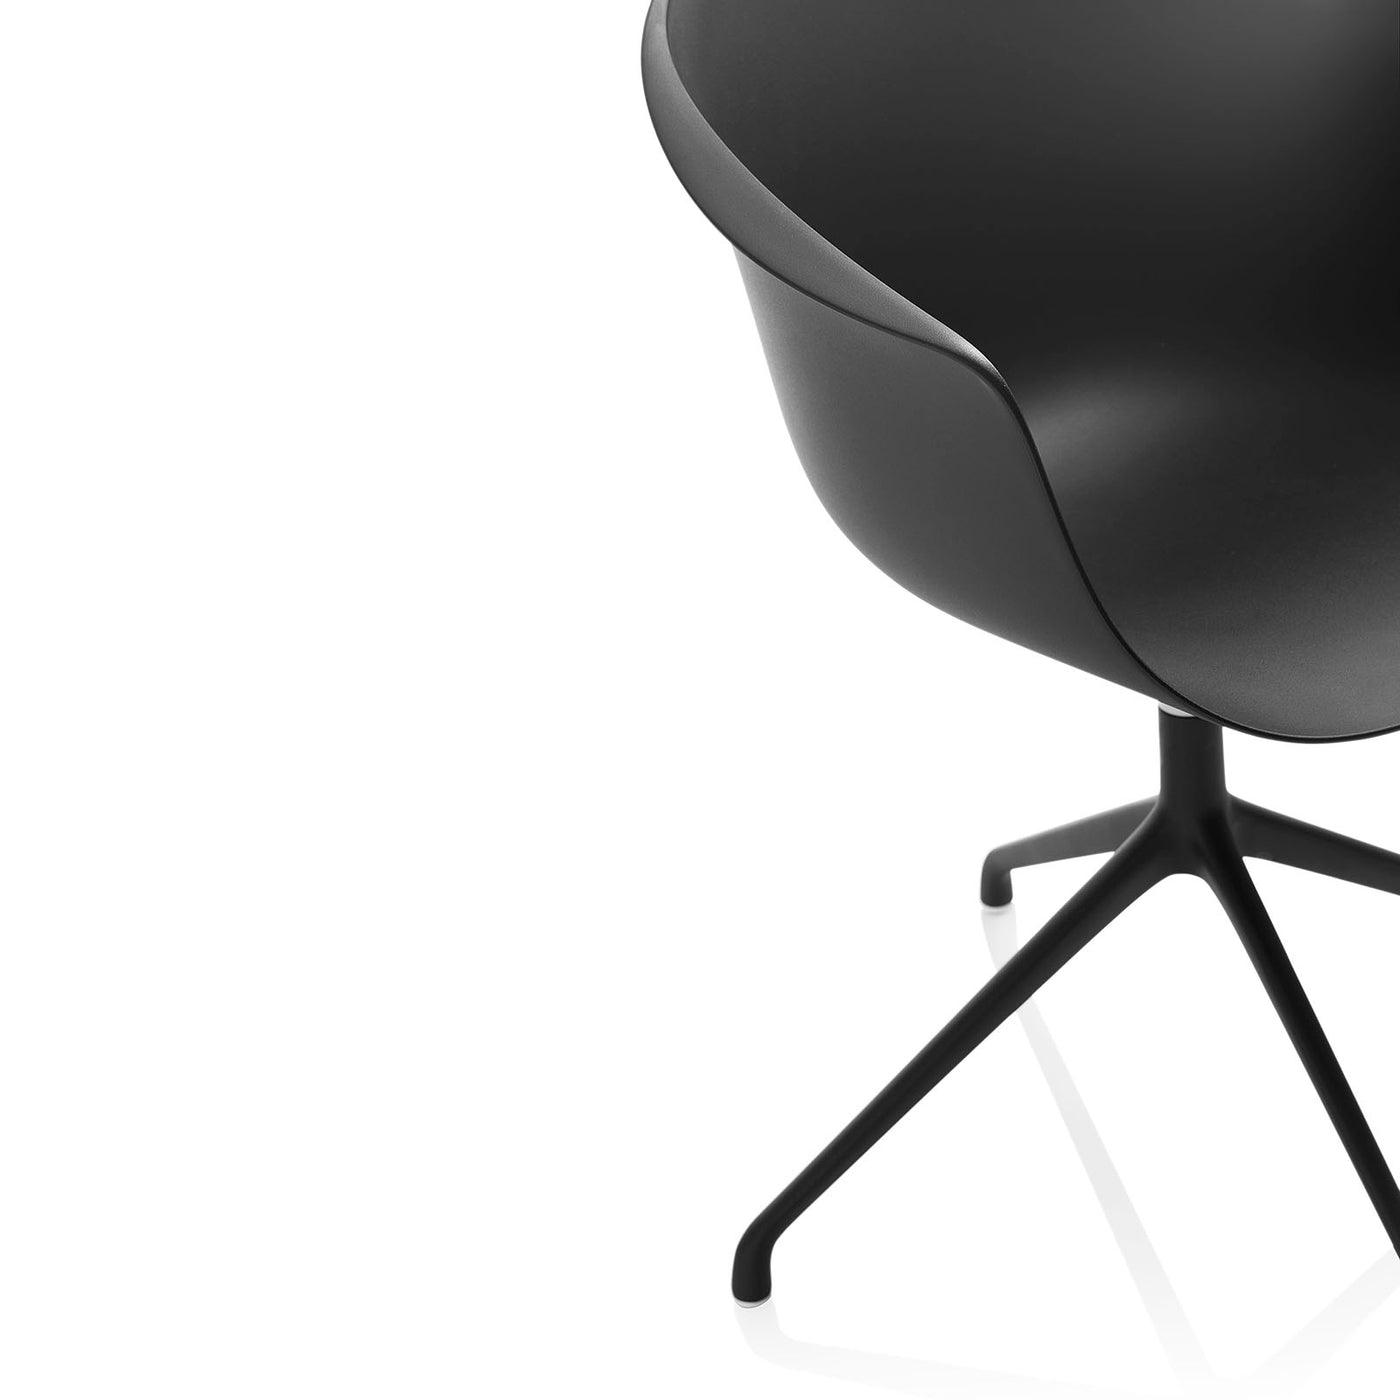 Set of 2 black POINT swivel chairs